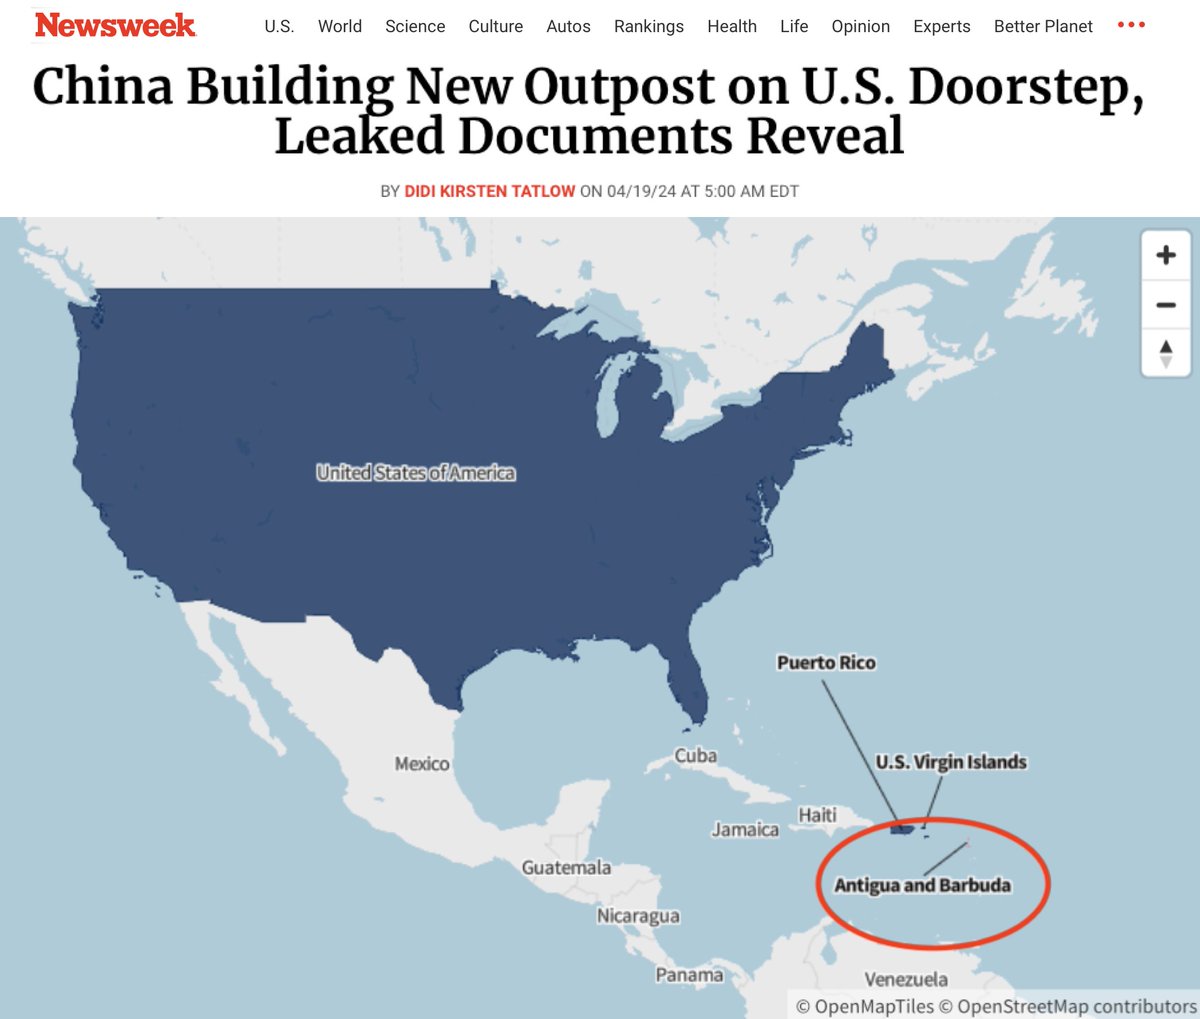 #China Building New Outpost on #US Doorstep, Leaked Documents Reveal Chinese investment in critical infrastructure including ports, airports and water systems are turning Antigua—once considered part of America's 'backyard'—into China's front yard, critics say. On a Caribbean